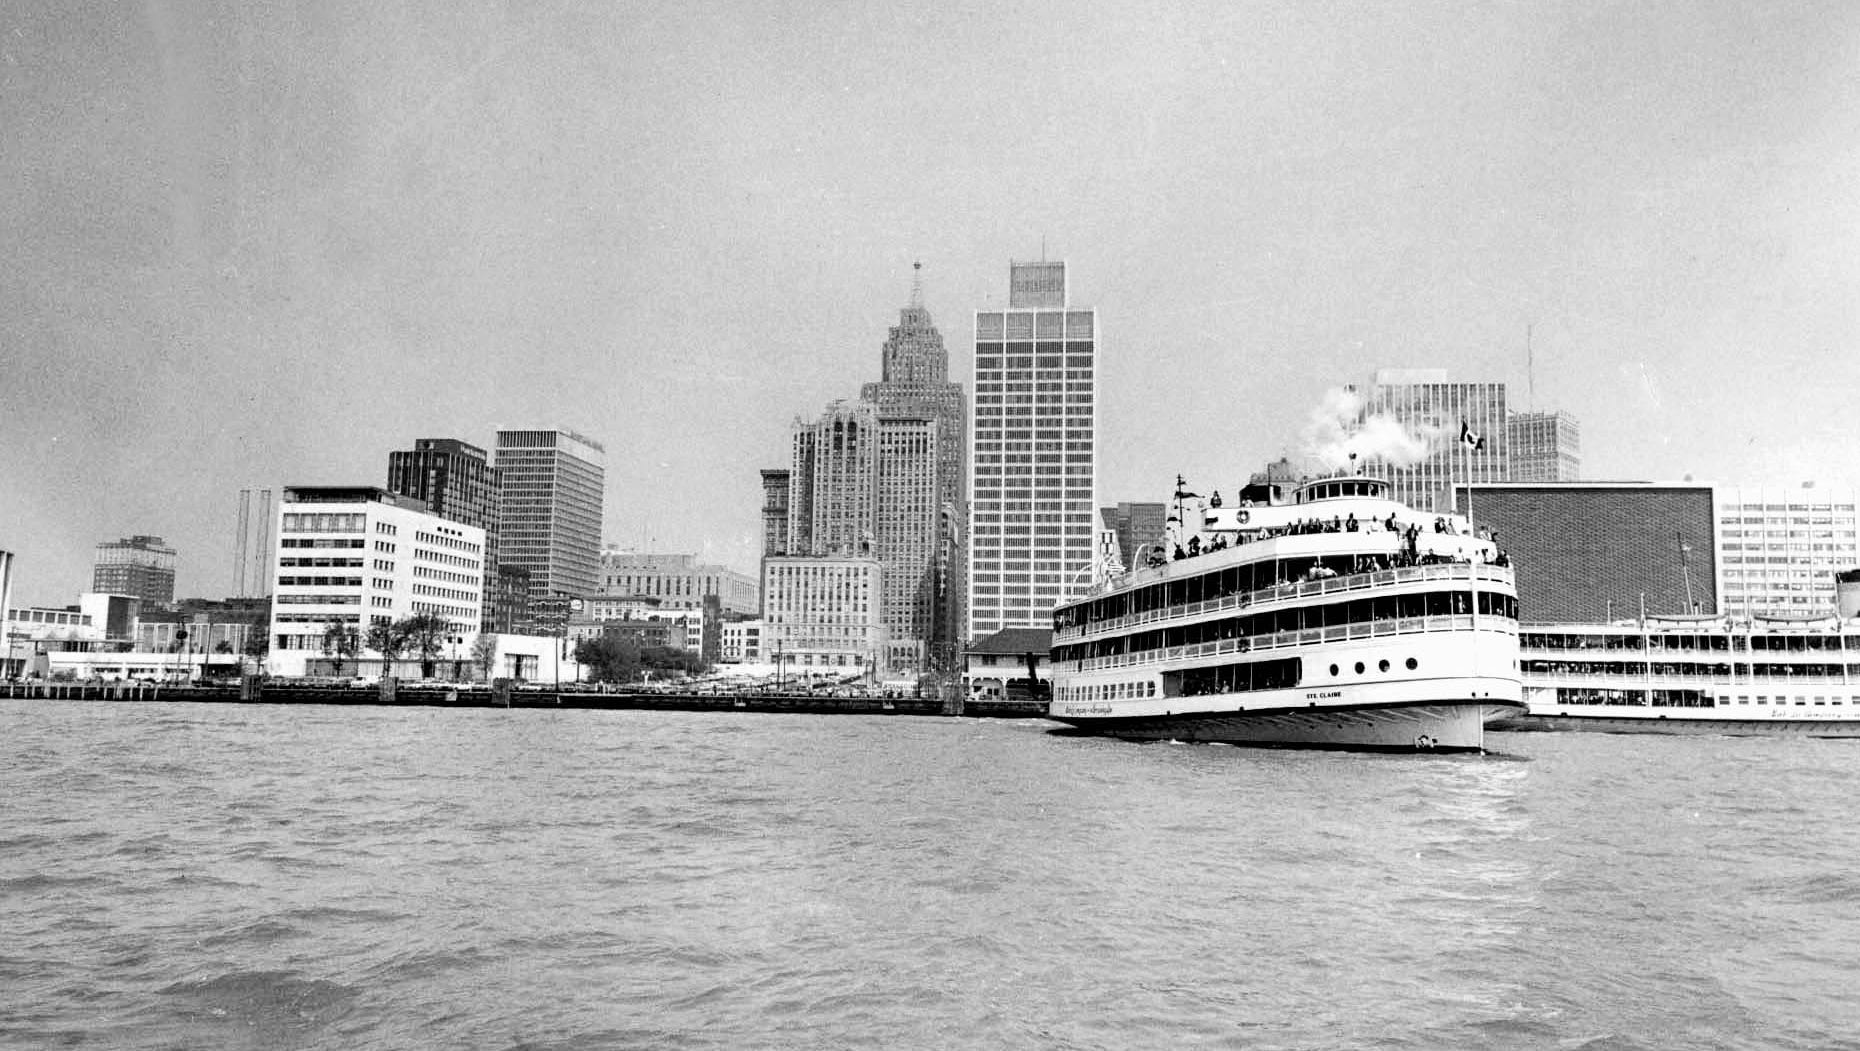 The Ste. Claire docks in Detroit in an undated photo.